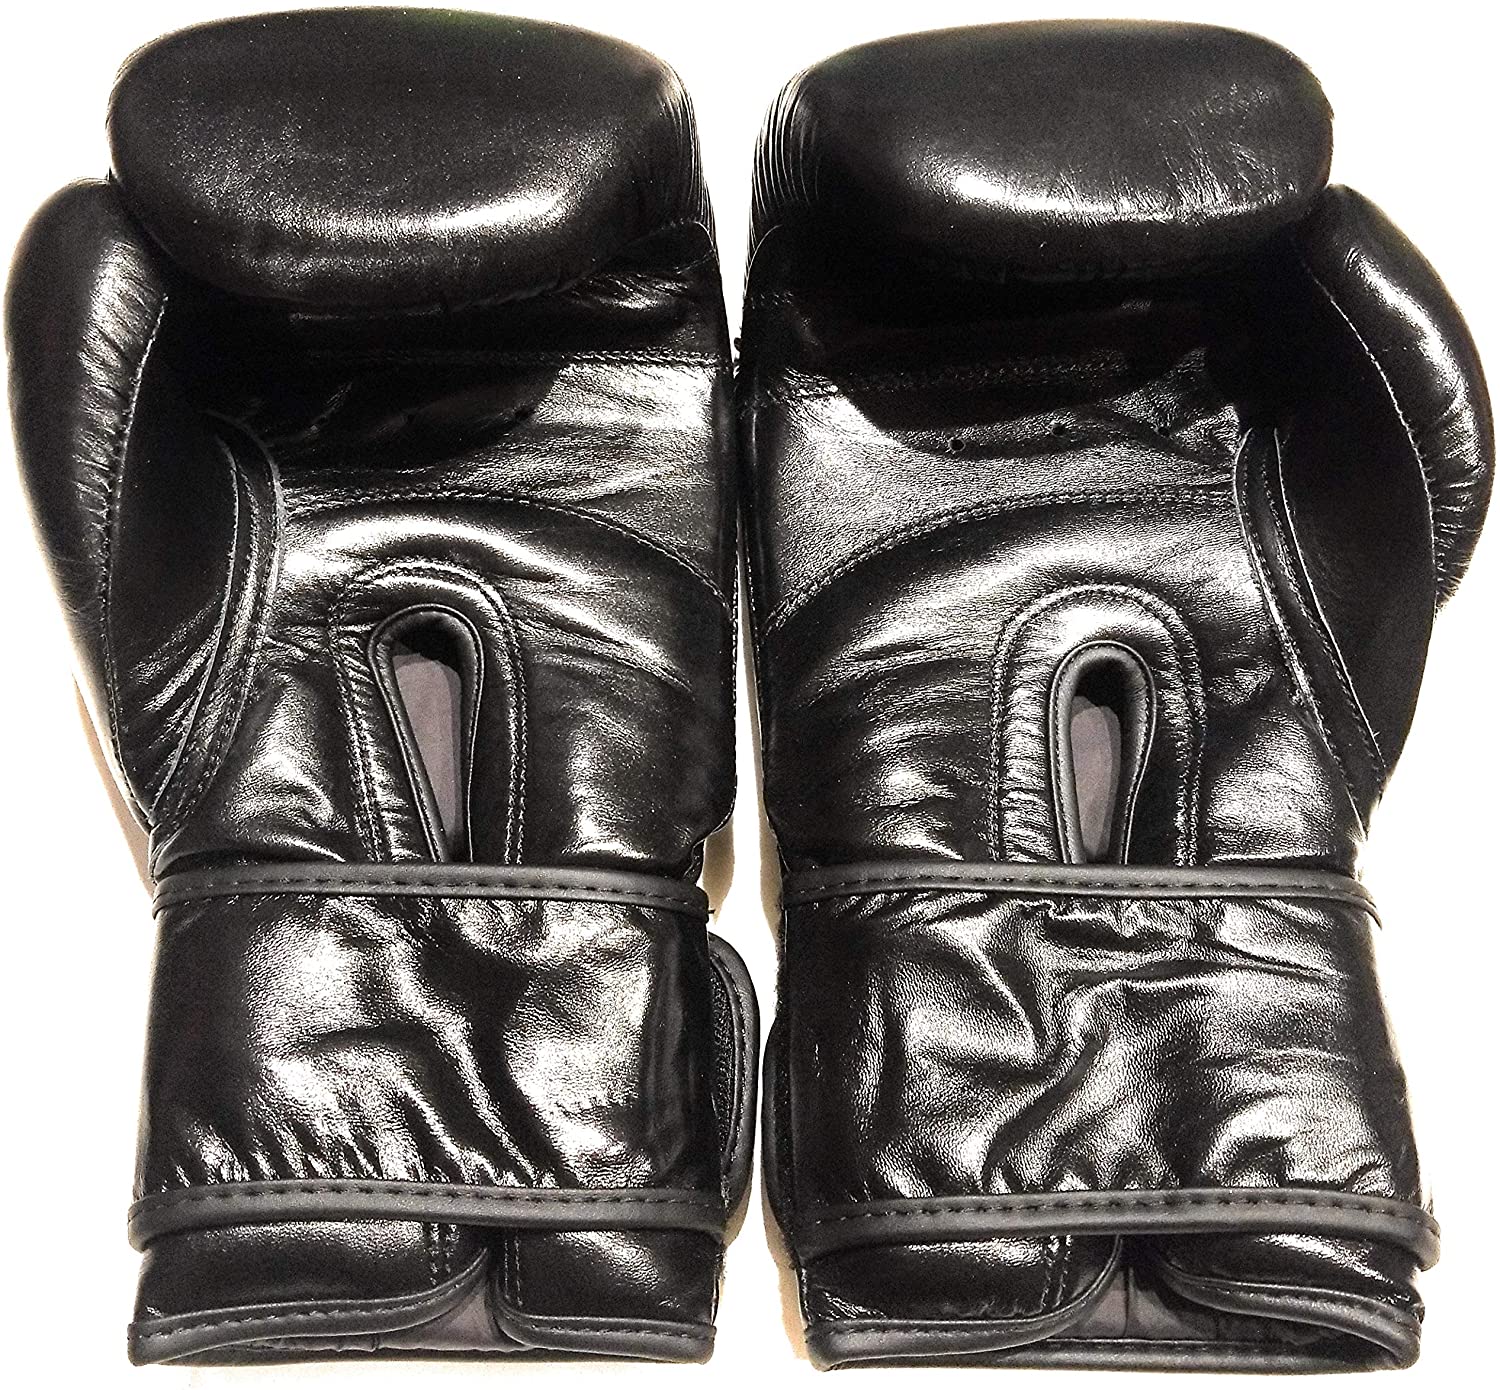 Top Grade Leather Boxing Gloves Muay Thai Training - Woldorf USA Inc